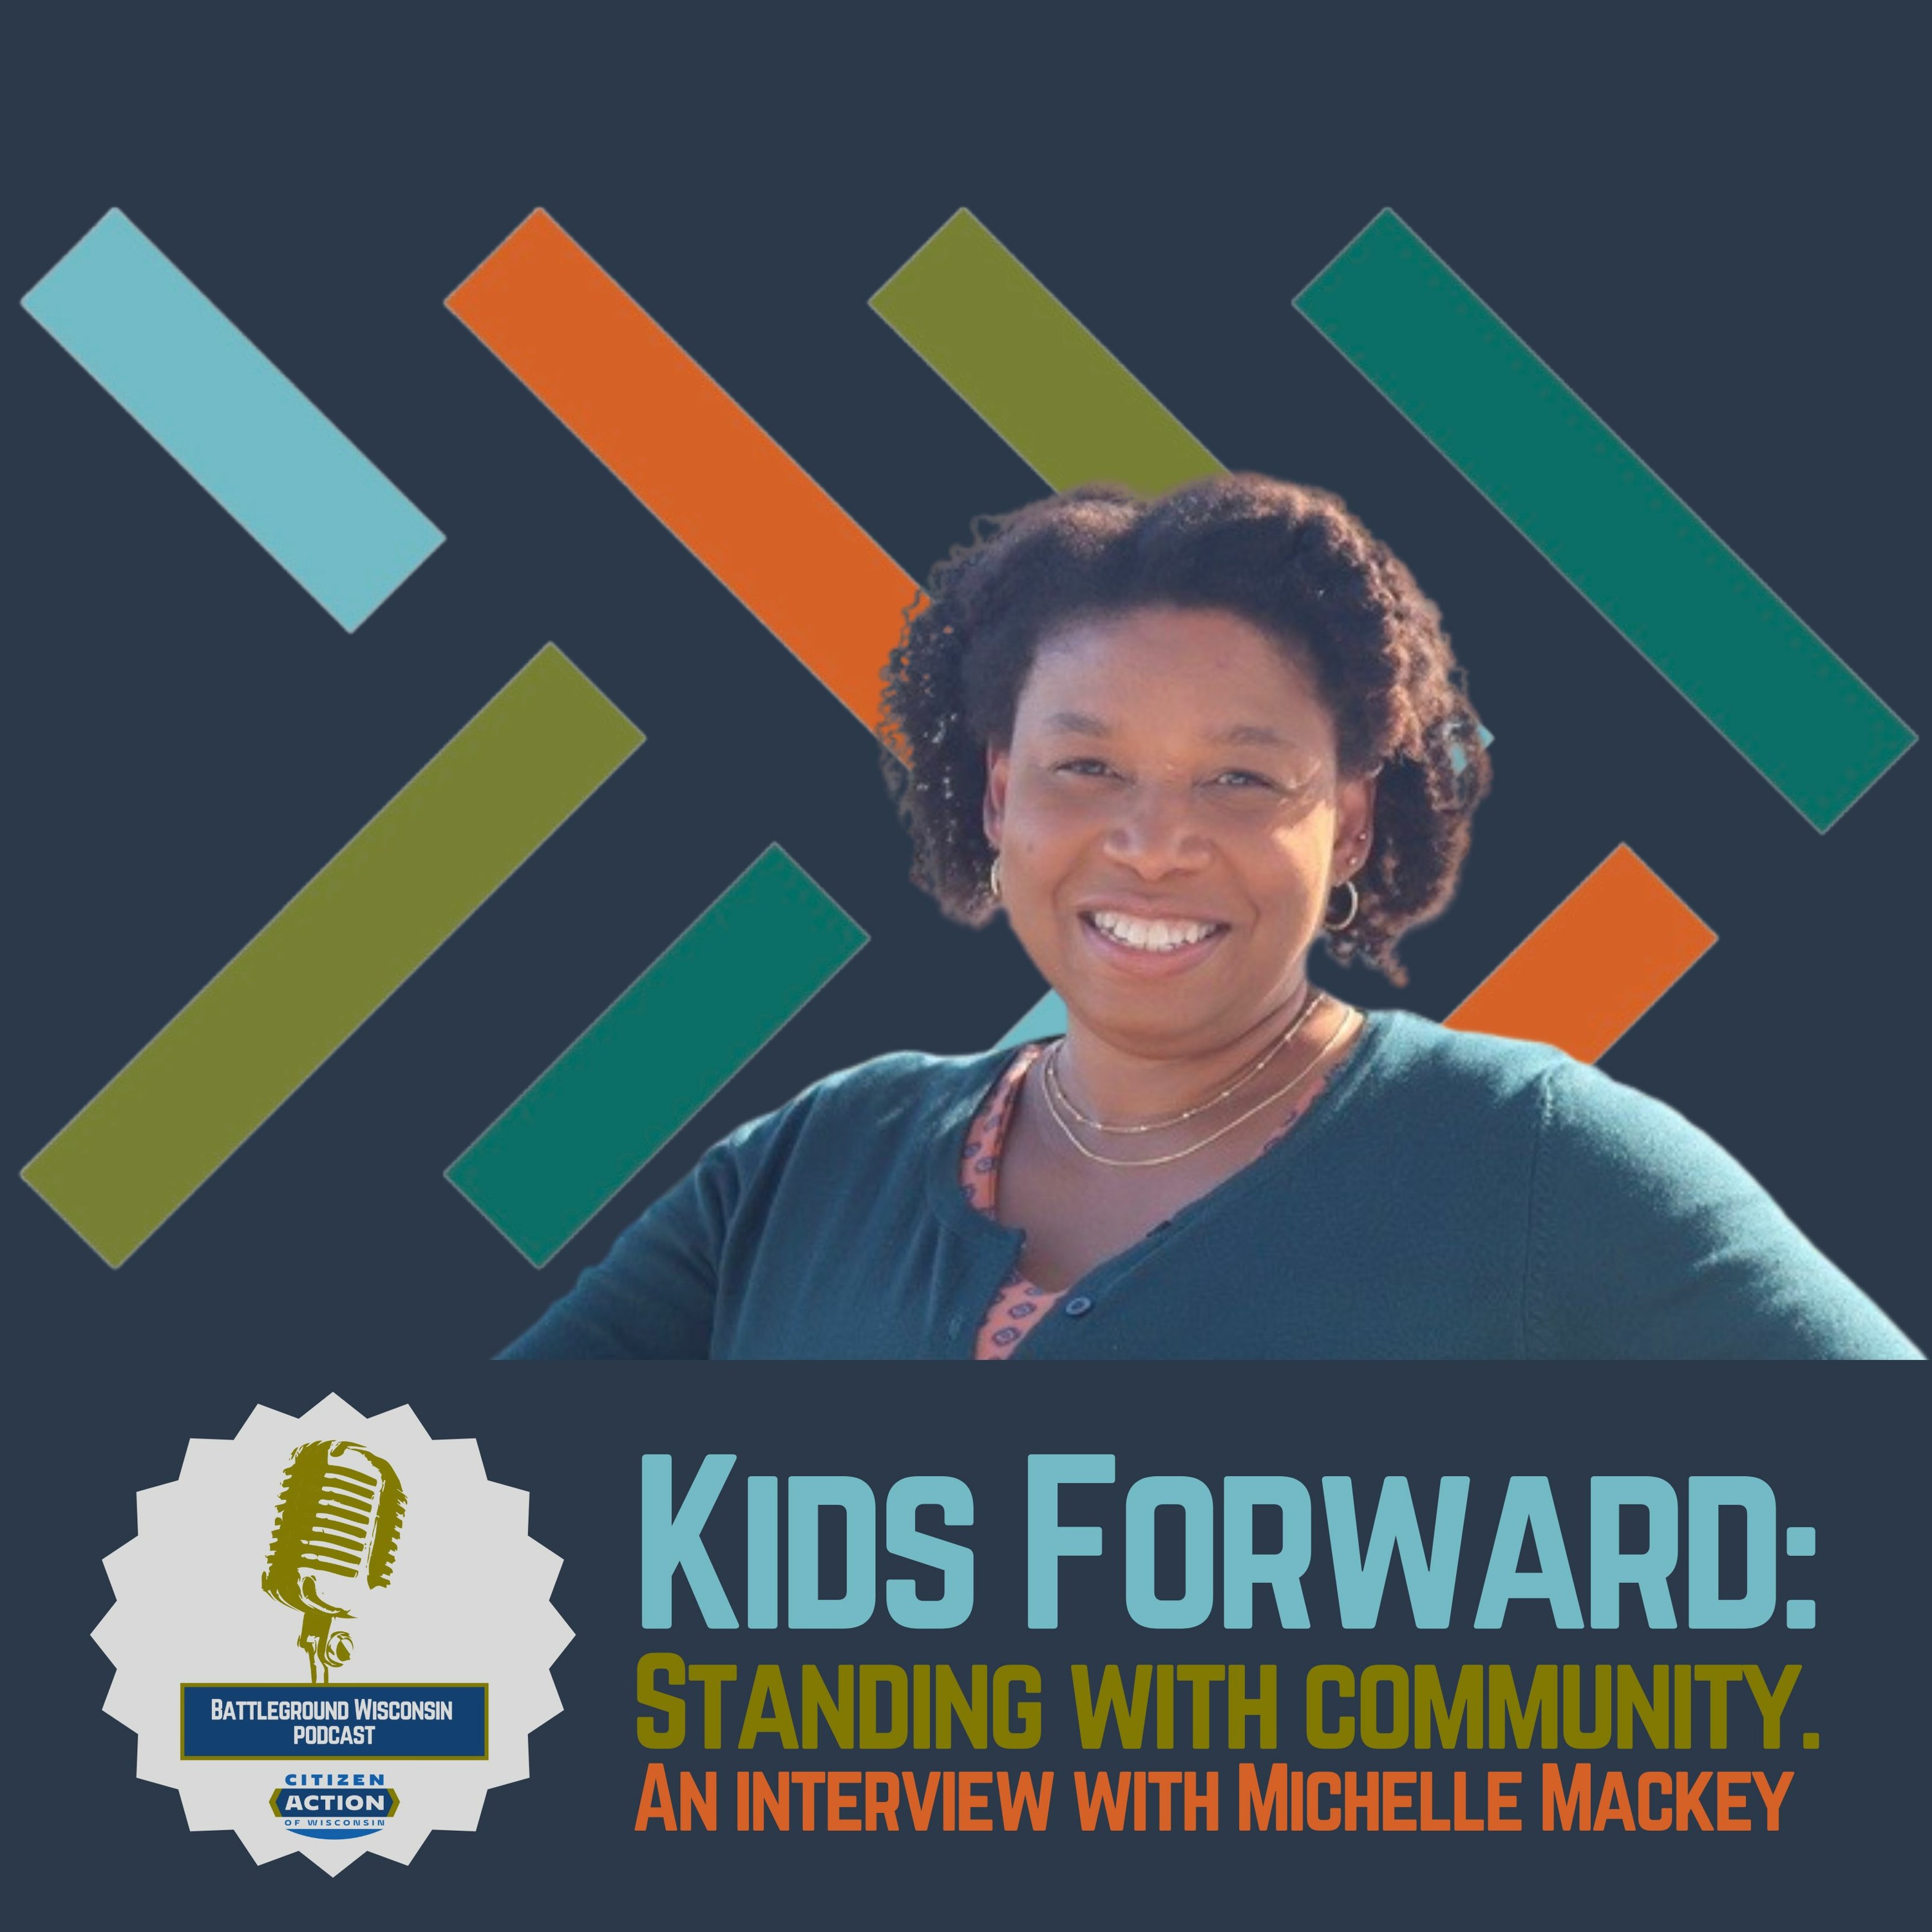 Kids Forward: Standing with Community